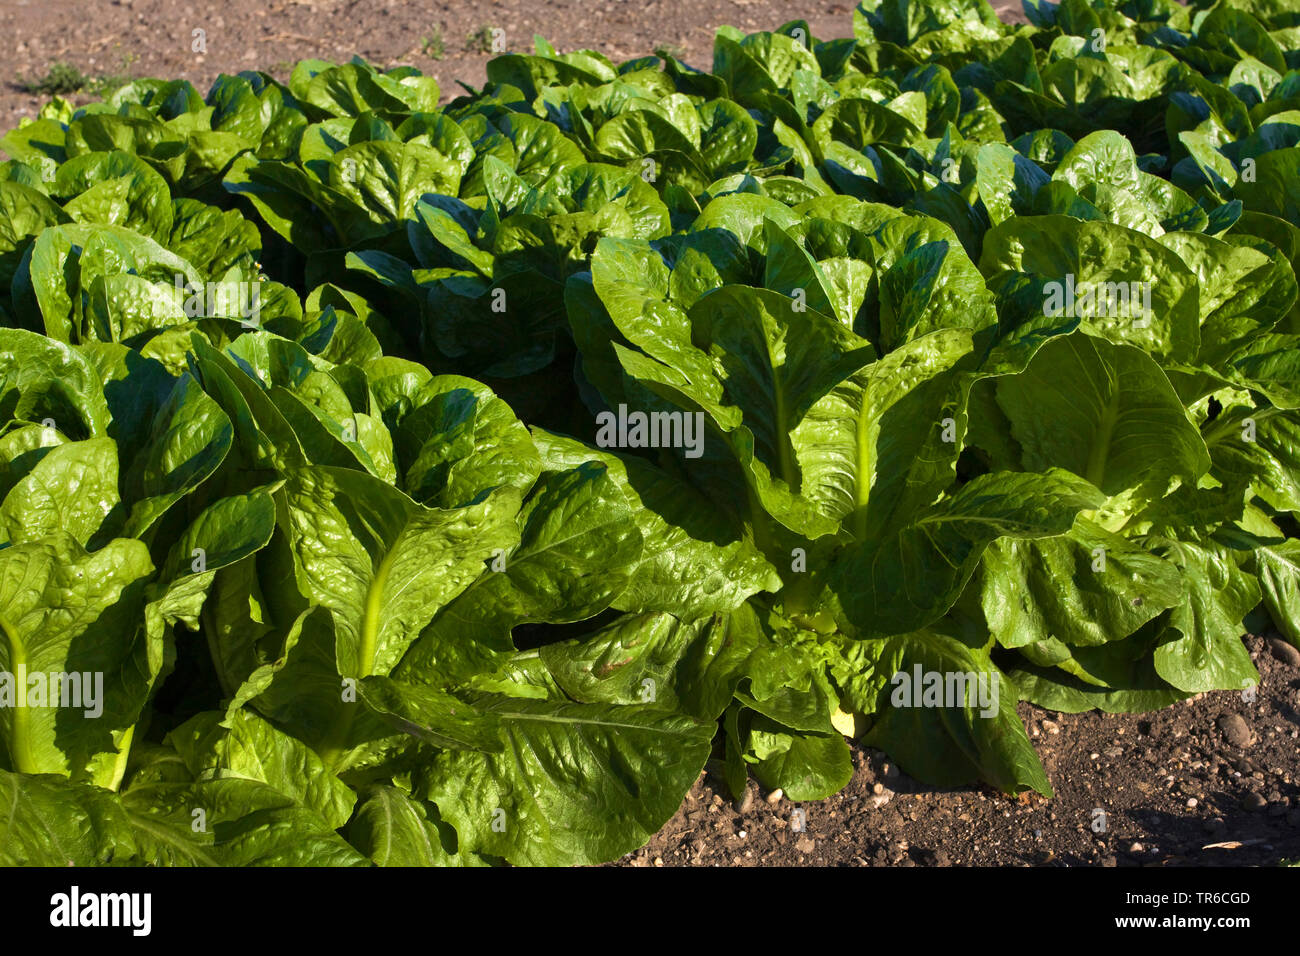 Chinese cabbage (Brassica rapa subsp. pekinensis, Brassica rapa subsp. glabra, Brassica pekinensis), on a field, Germany, Bavaria Stock Photo